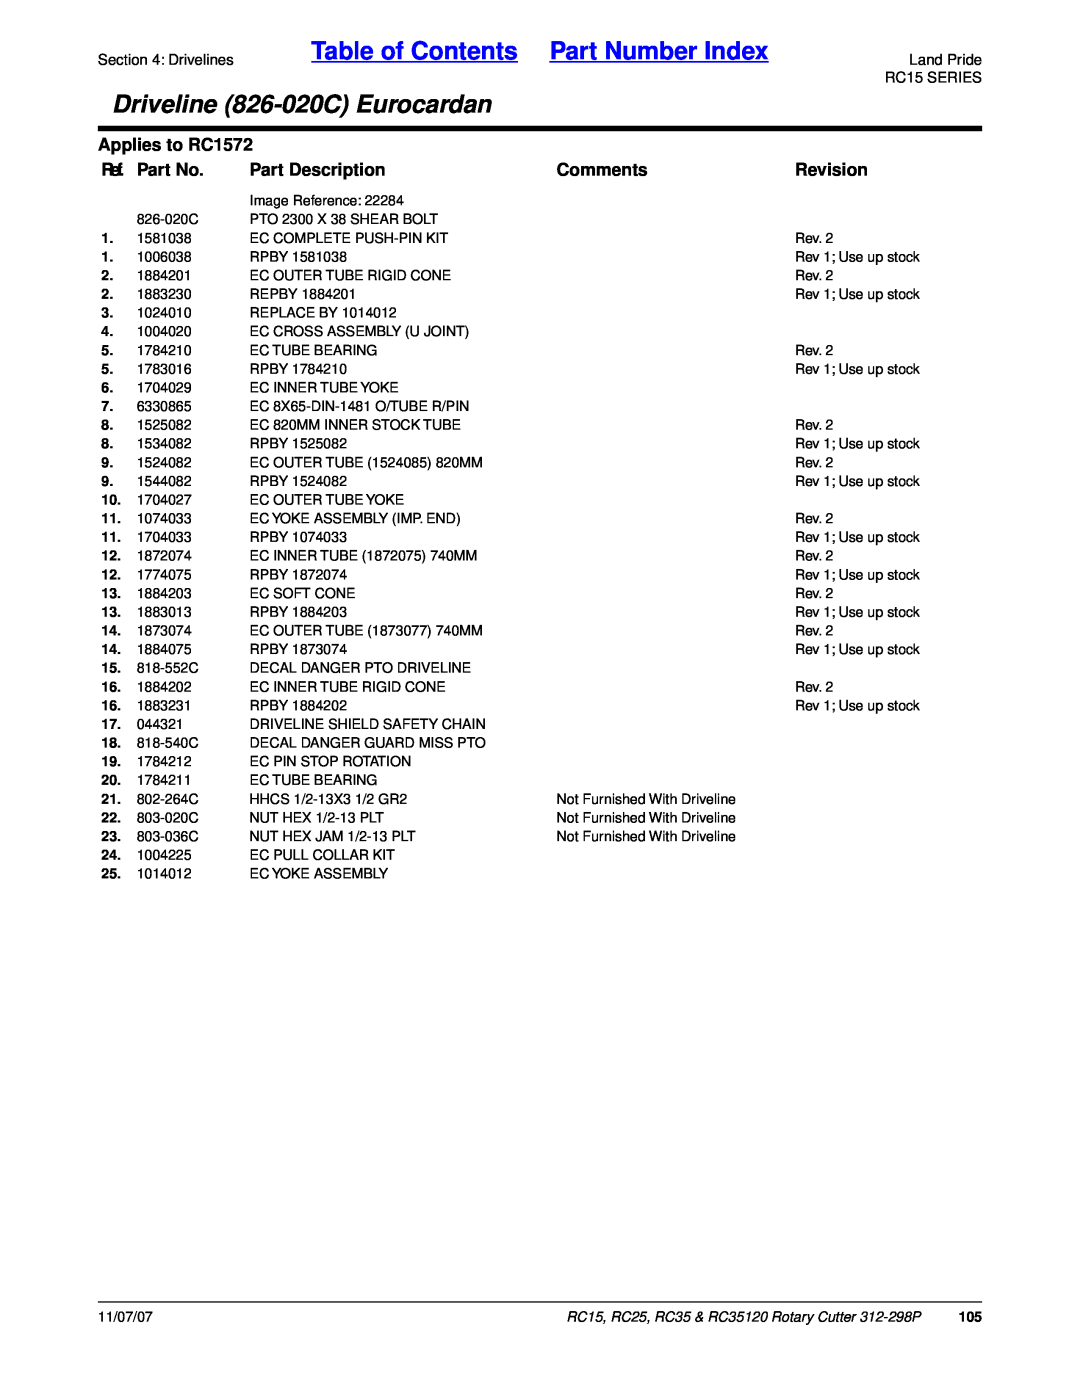 Land Pride RC35, RC25 Table of Contents Part Number Index, Driveline 826-020CEurocardan, Applies to RC1572, Ref. Part No 